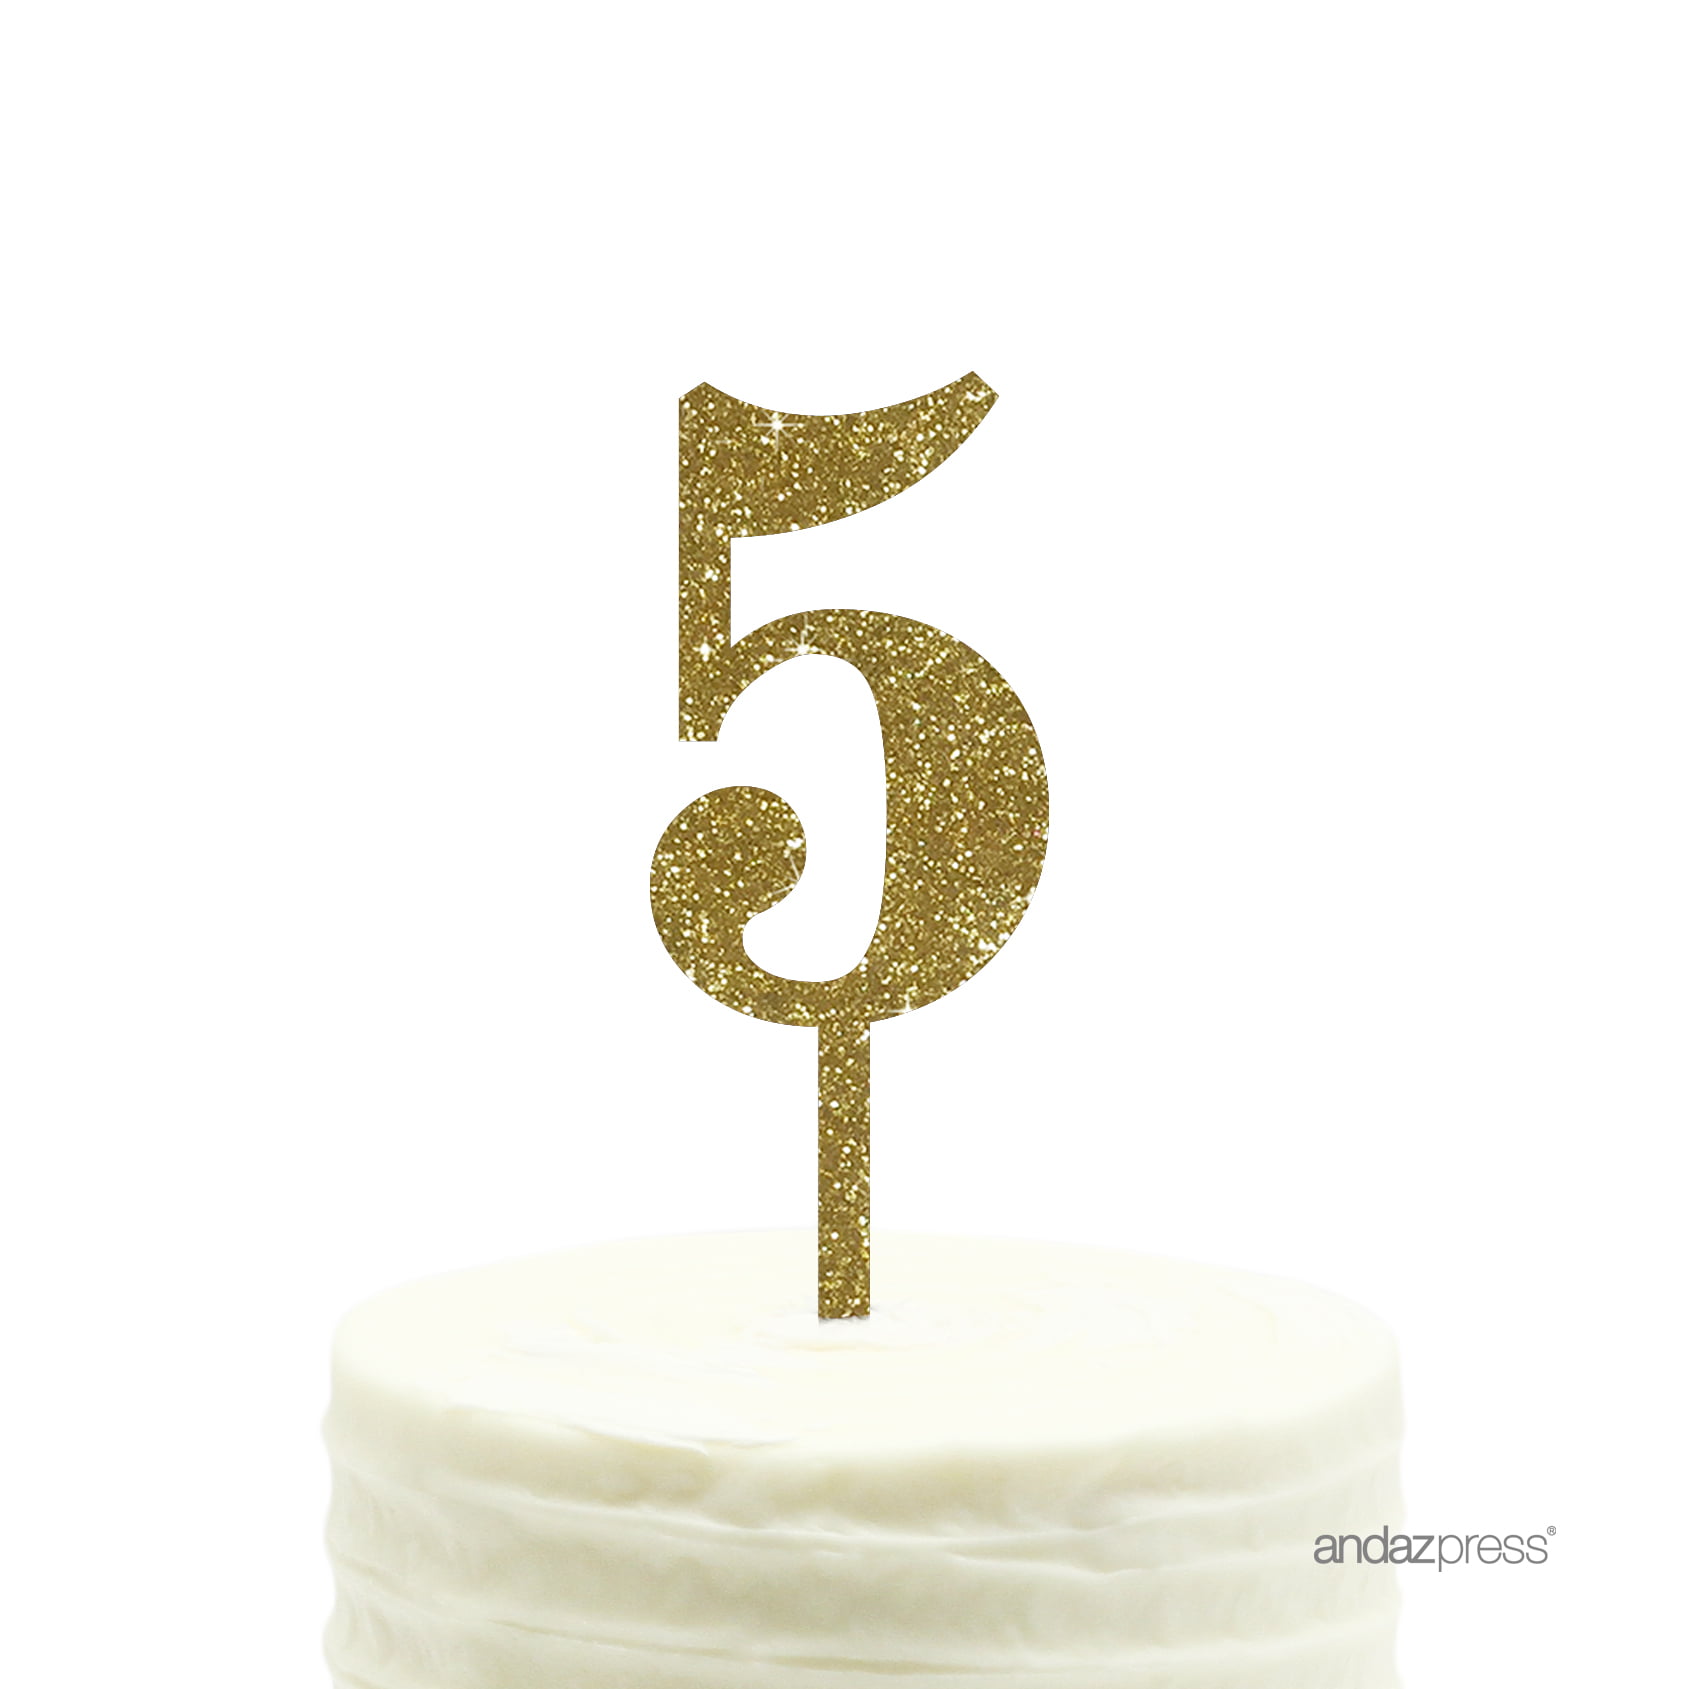 Gold Cake Topper Acrylic Happy Birthday Cake Decoration Supplies (5 Pieces)